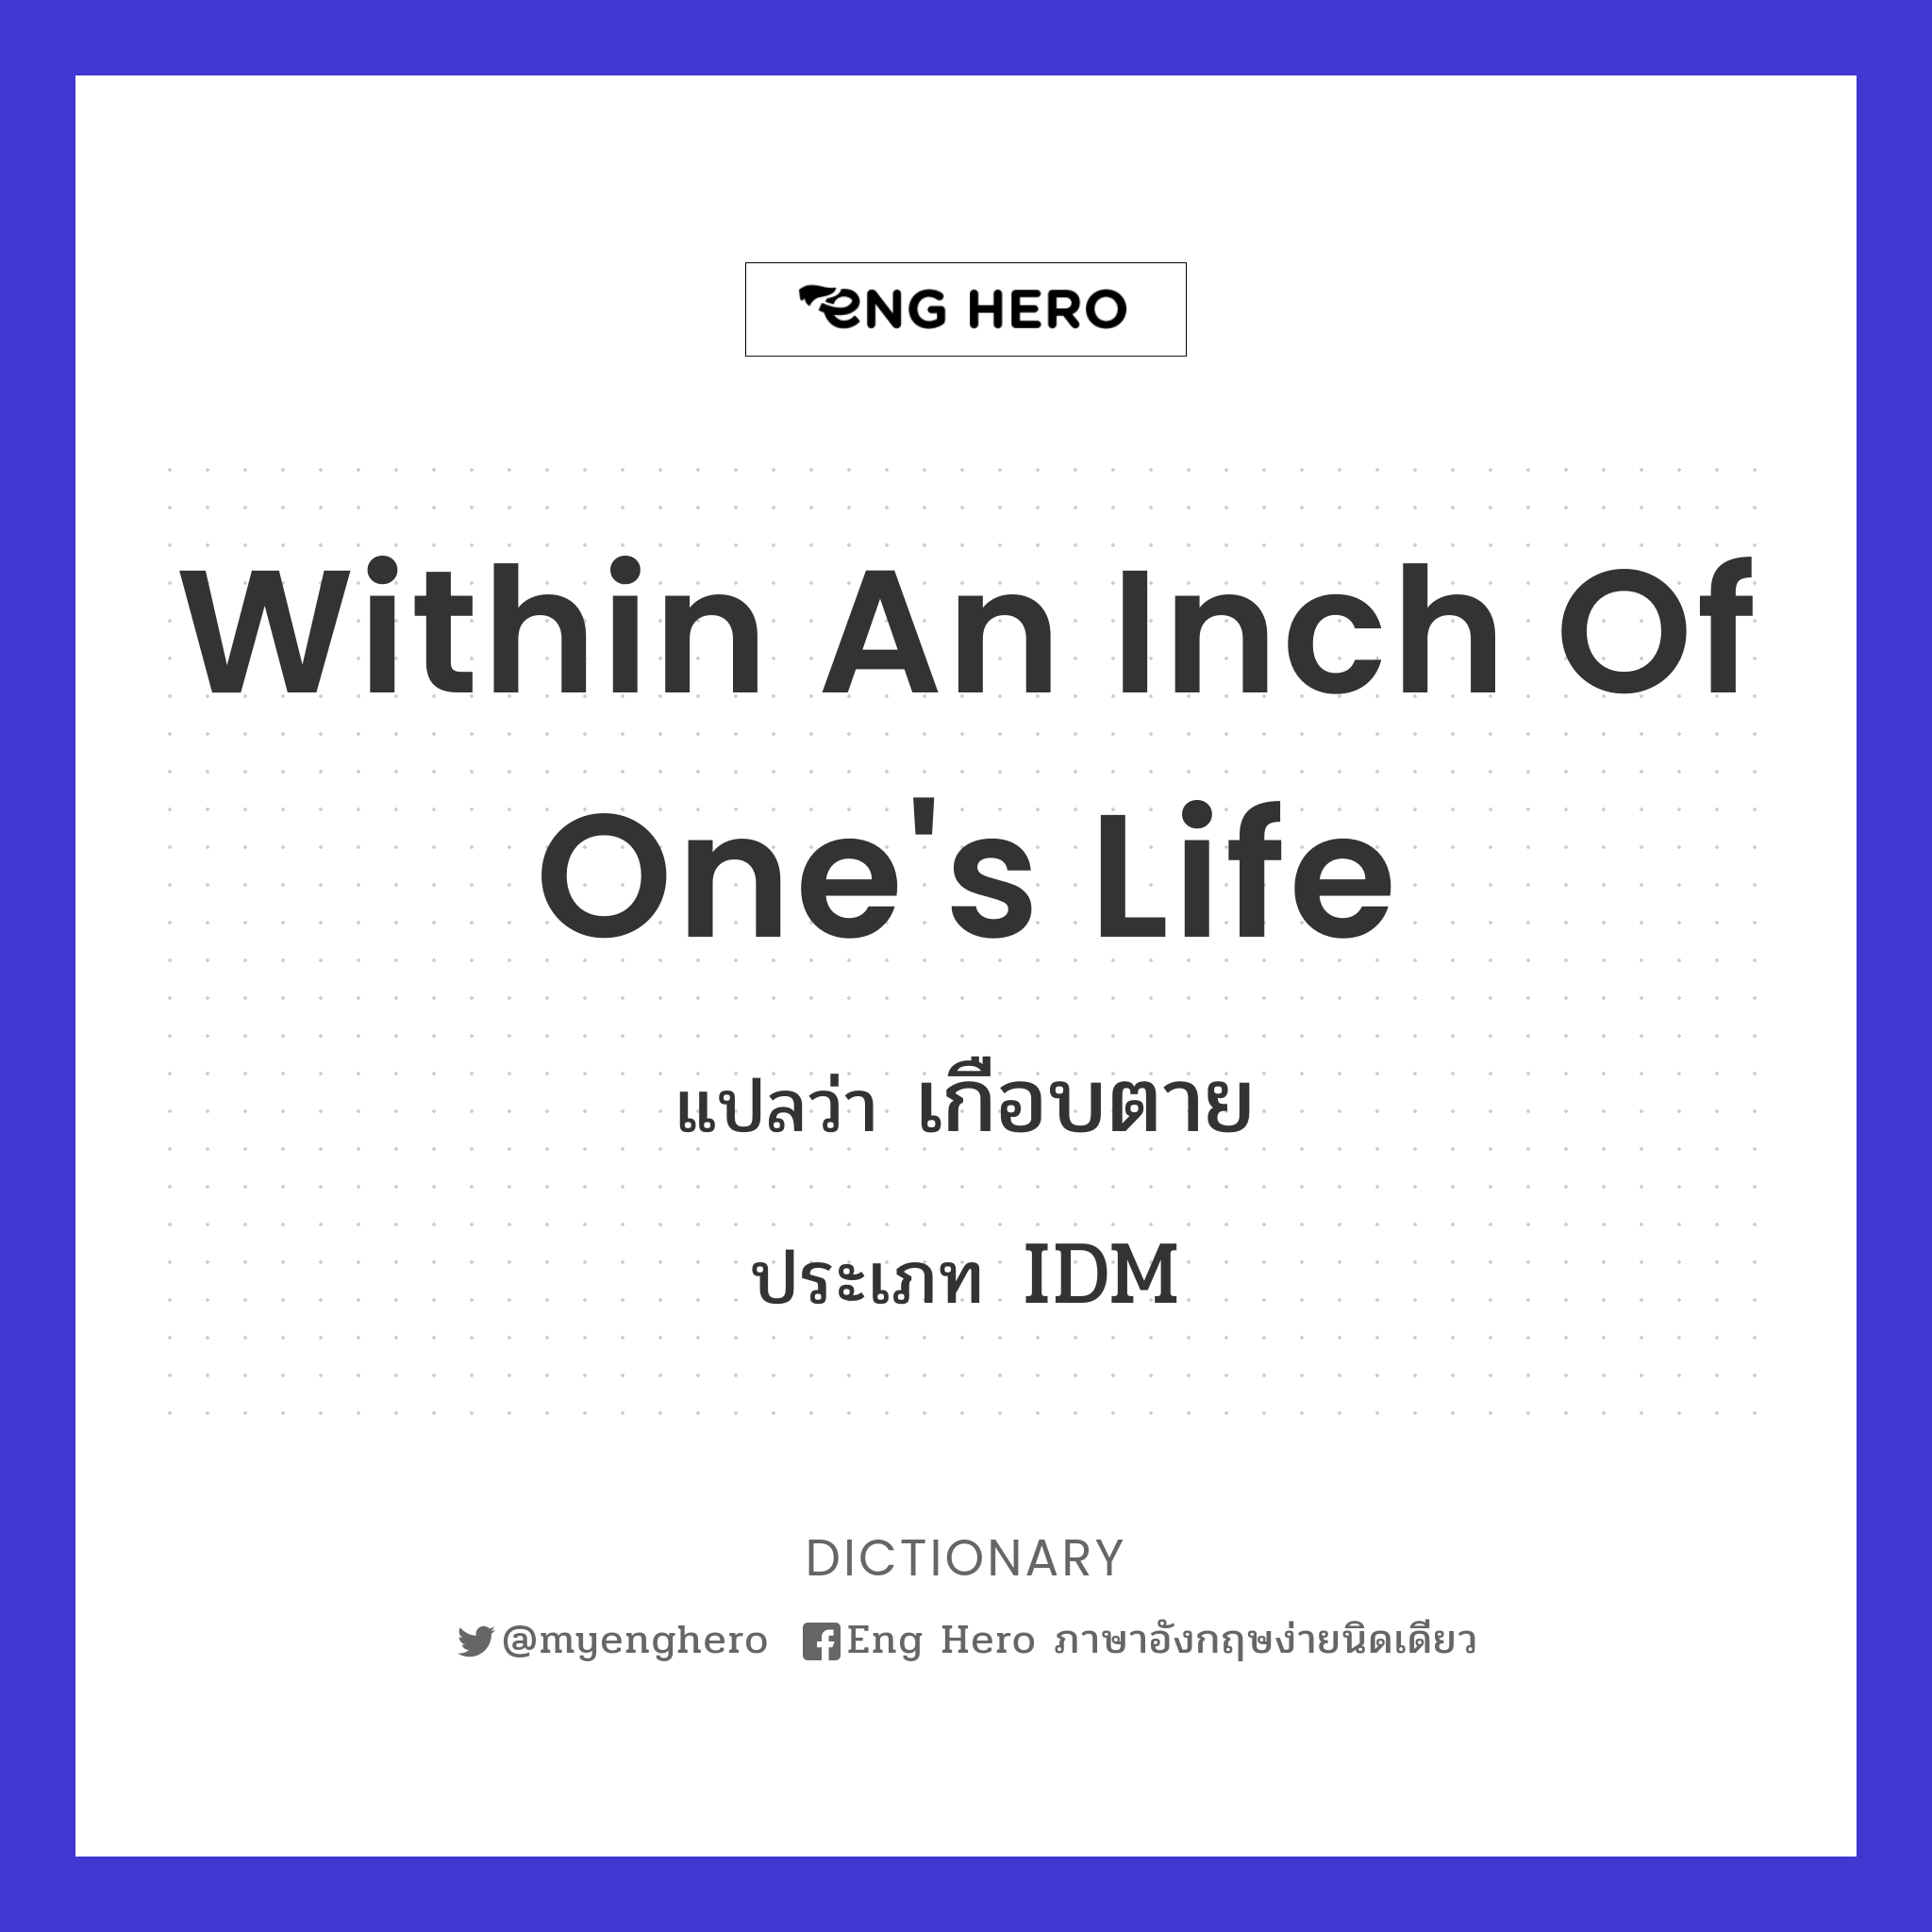 within an inch of one's life